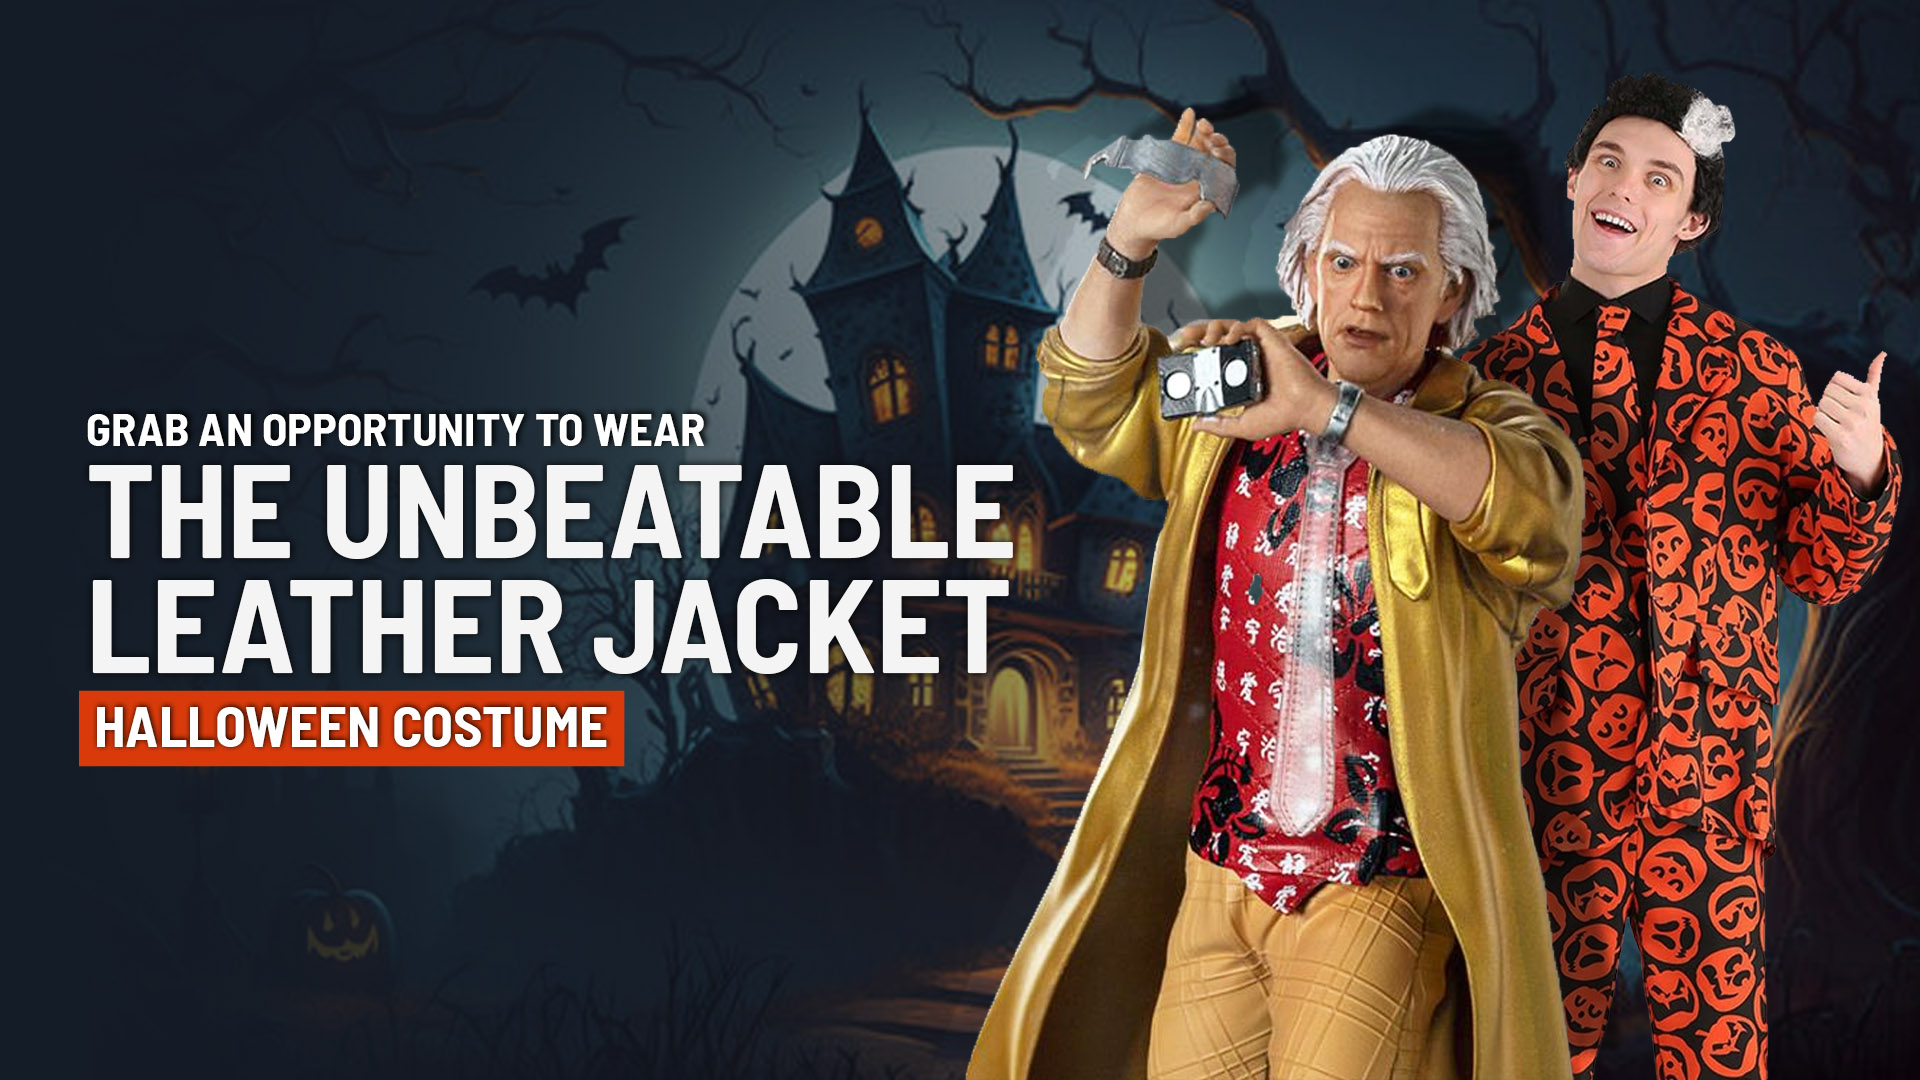 Grab An Opportunity To Wear The Unbeatable Leather Jacket Halloween Costume